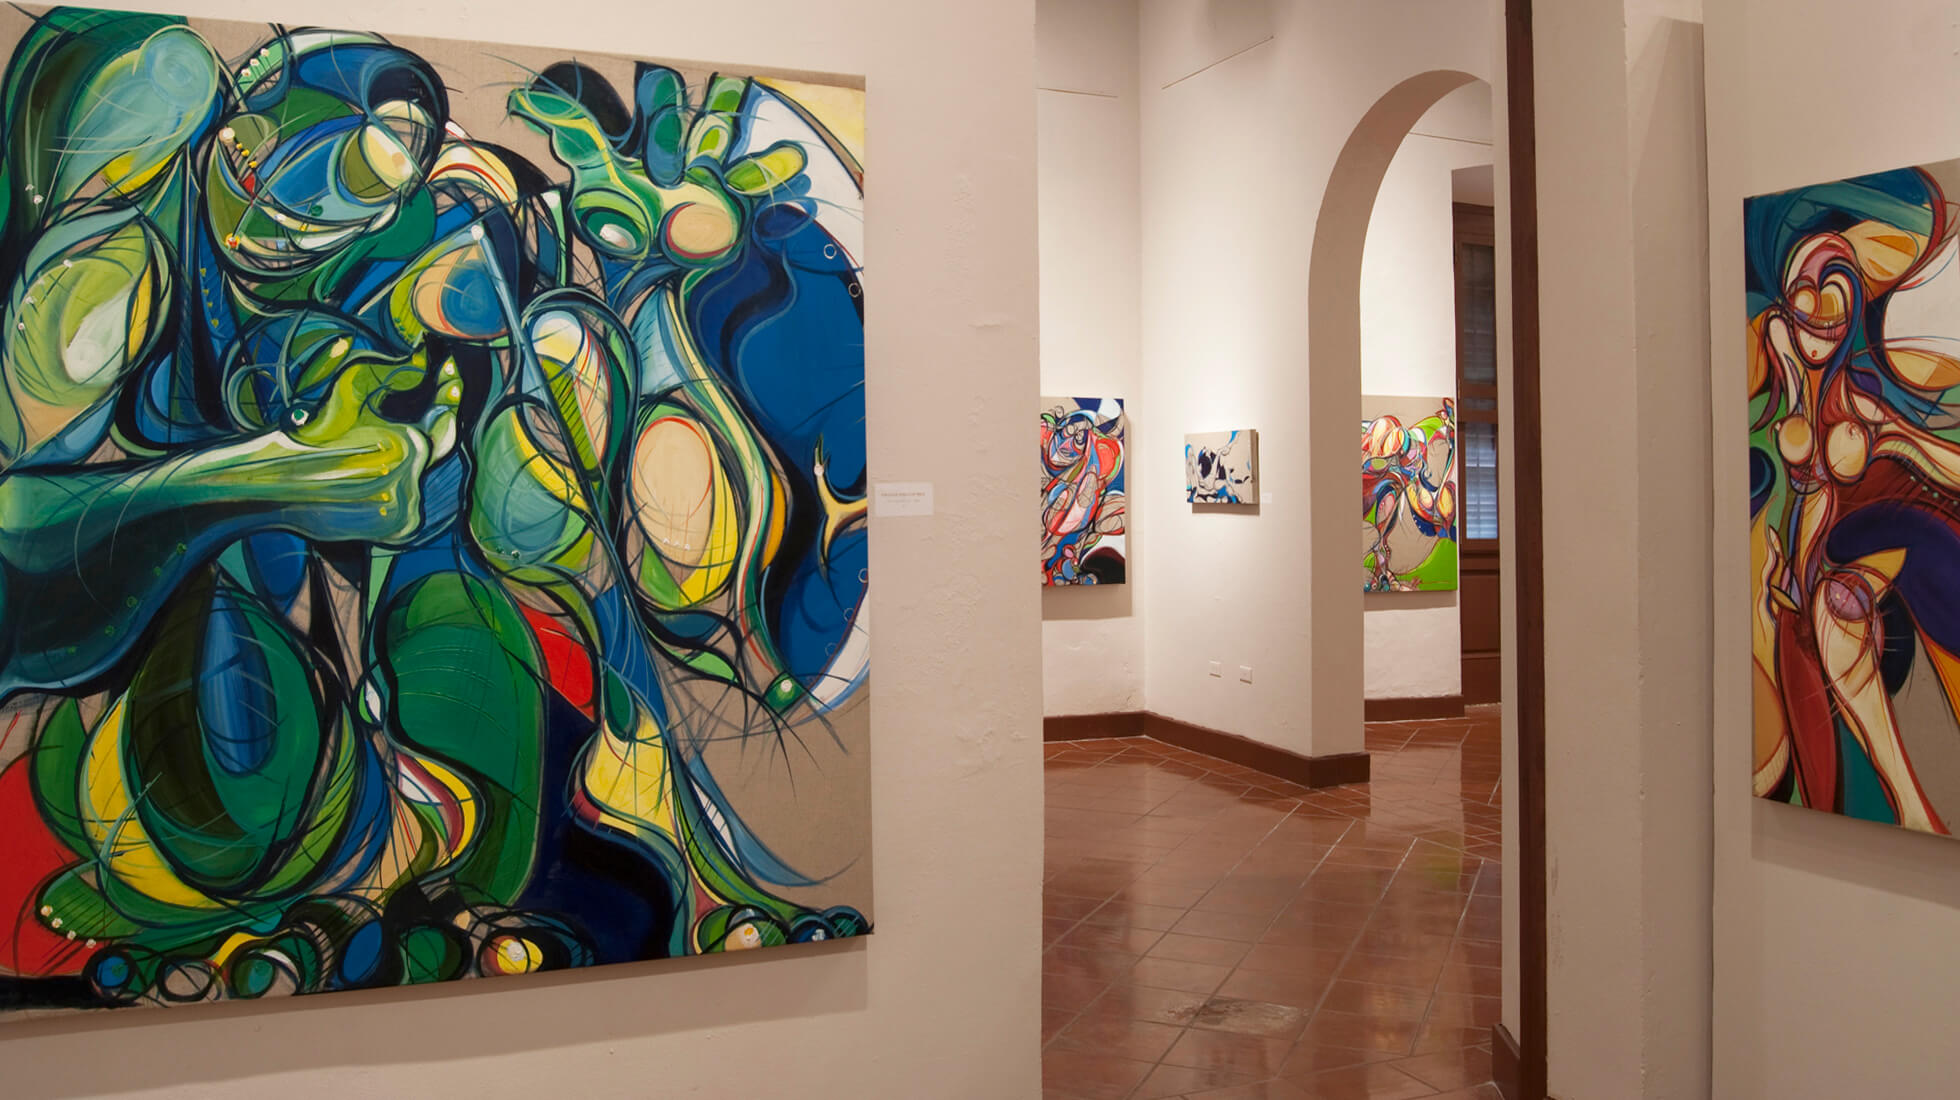 Photo of the Salon B of artist and painter Michael J. Korber at his Art Retrospective at the Museo de las Américas in Old San Juan, Puerto Rico, titled - A decade of line and color, in 2007.